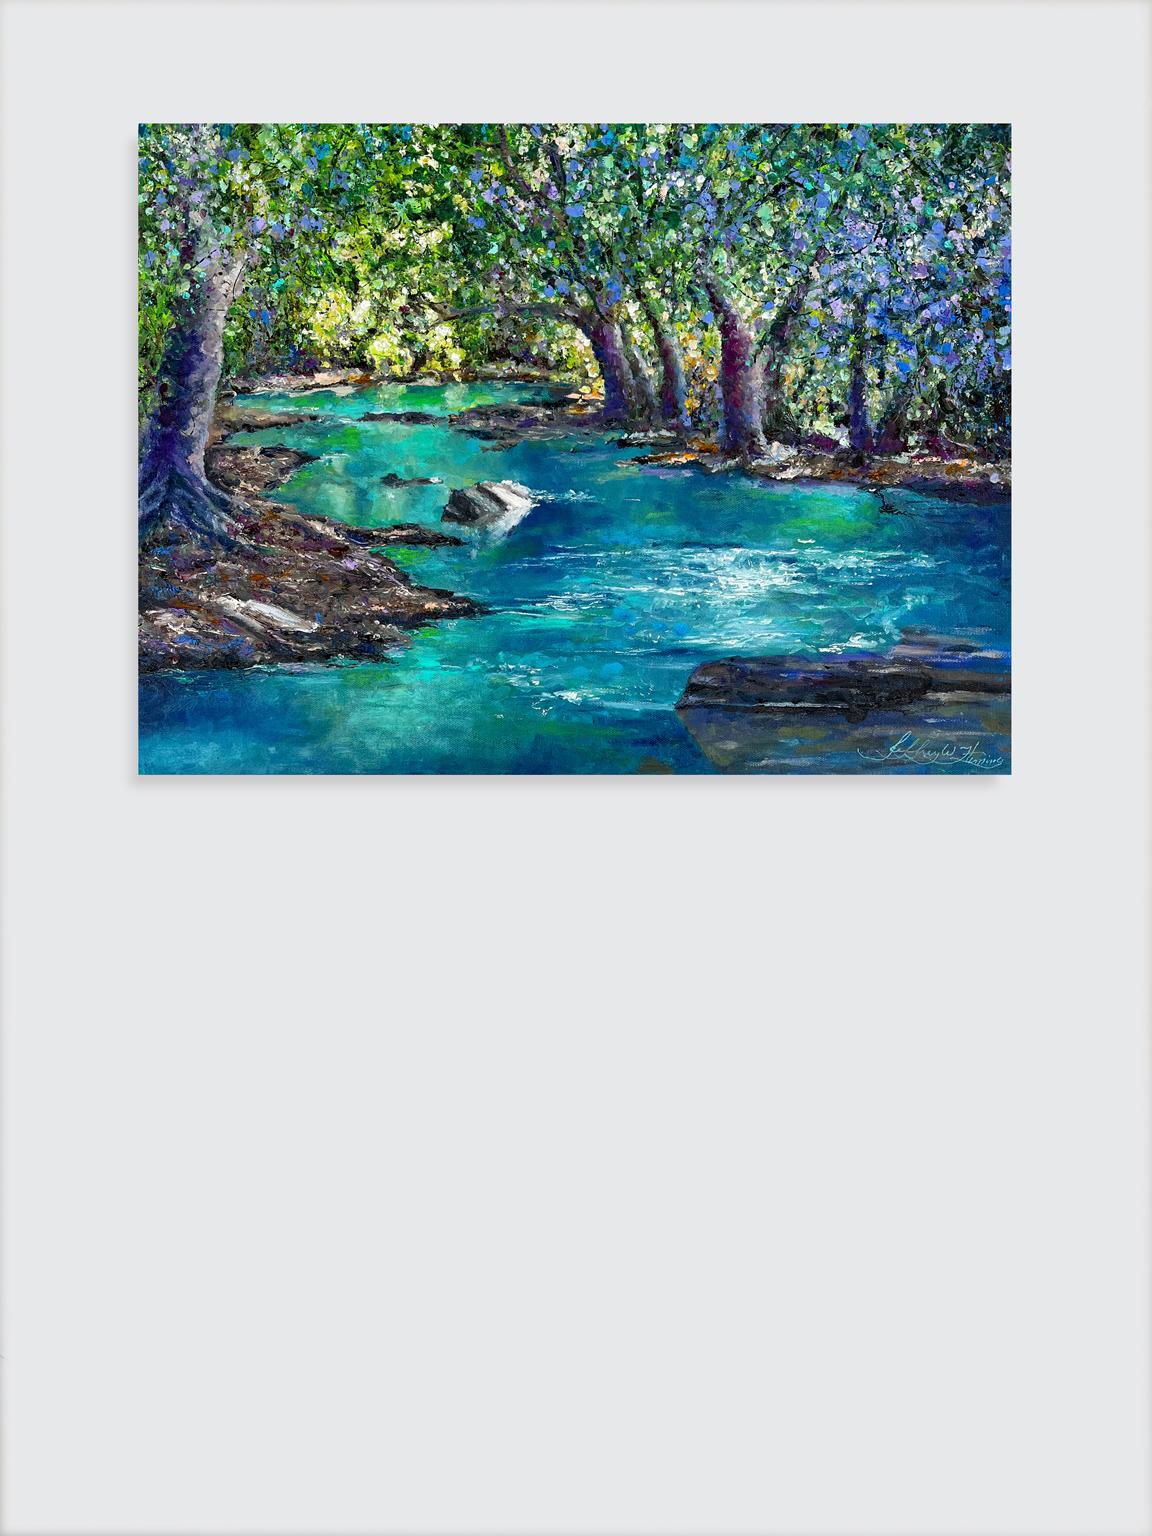 <p>Artist Comments<br>Sunlight filters through a lush canopy of trees, casting a warm glow and gentle shade upon a tranquil canyon stream. Artist Jeff Fleming enhances the water's color to draw attention to the dappled light. The painting features